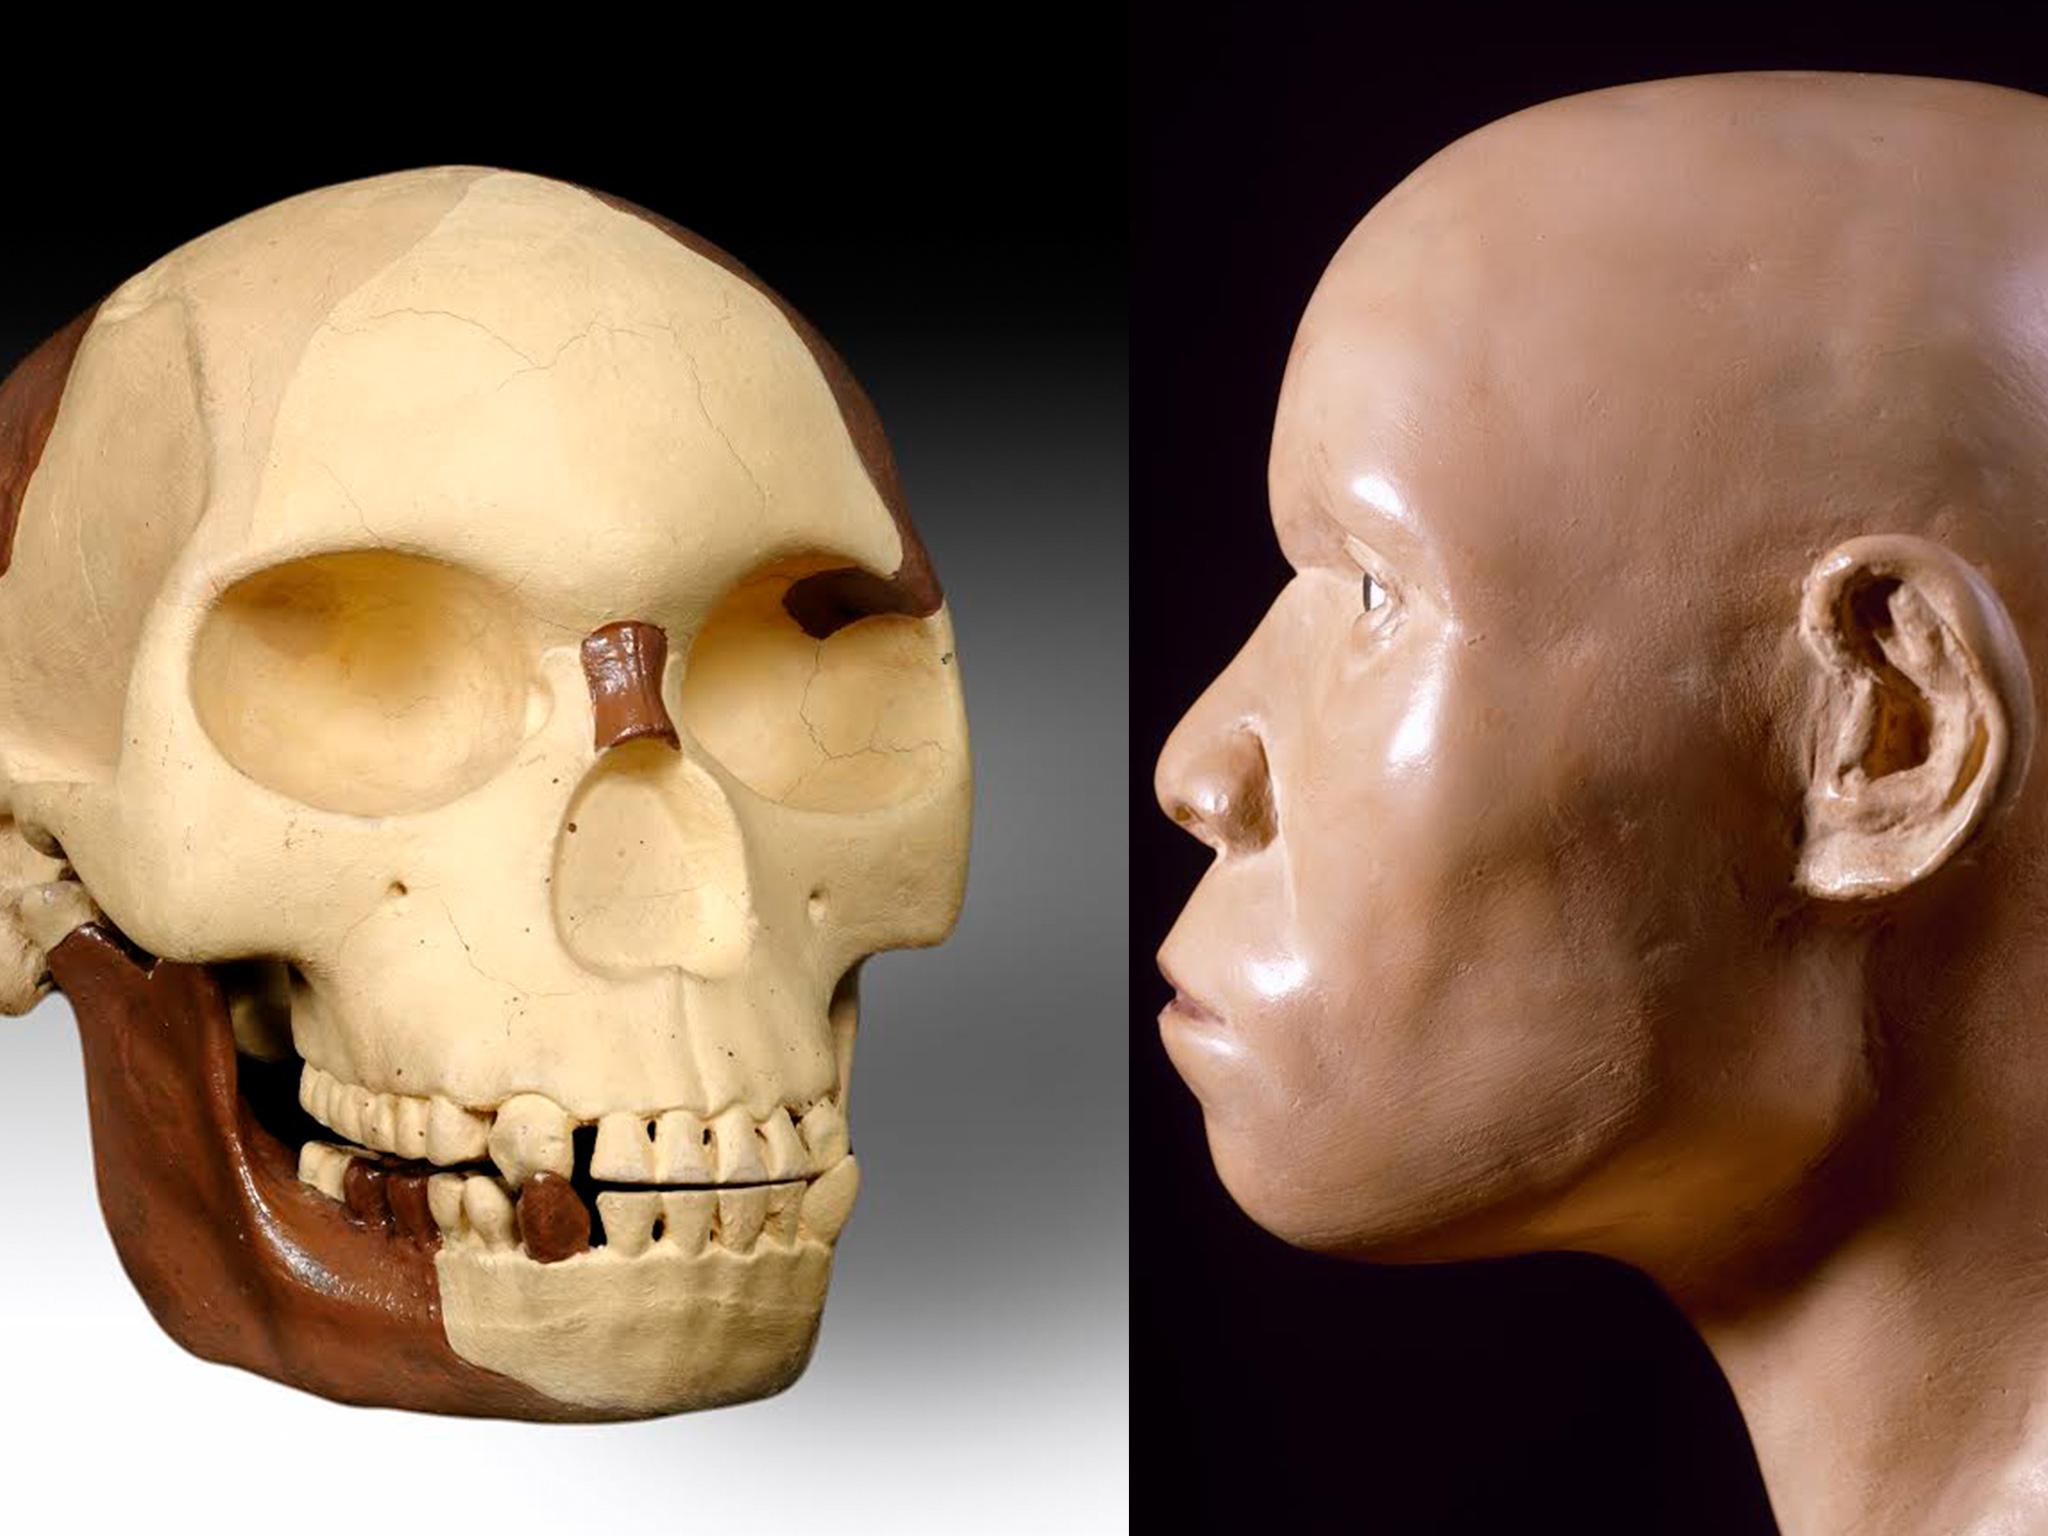 A reconstruction of the remains of the so-called Piltdown Man